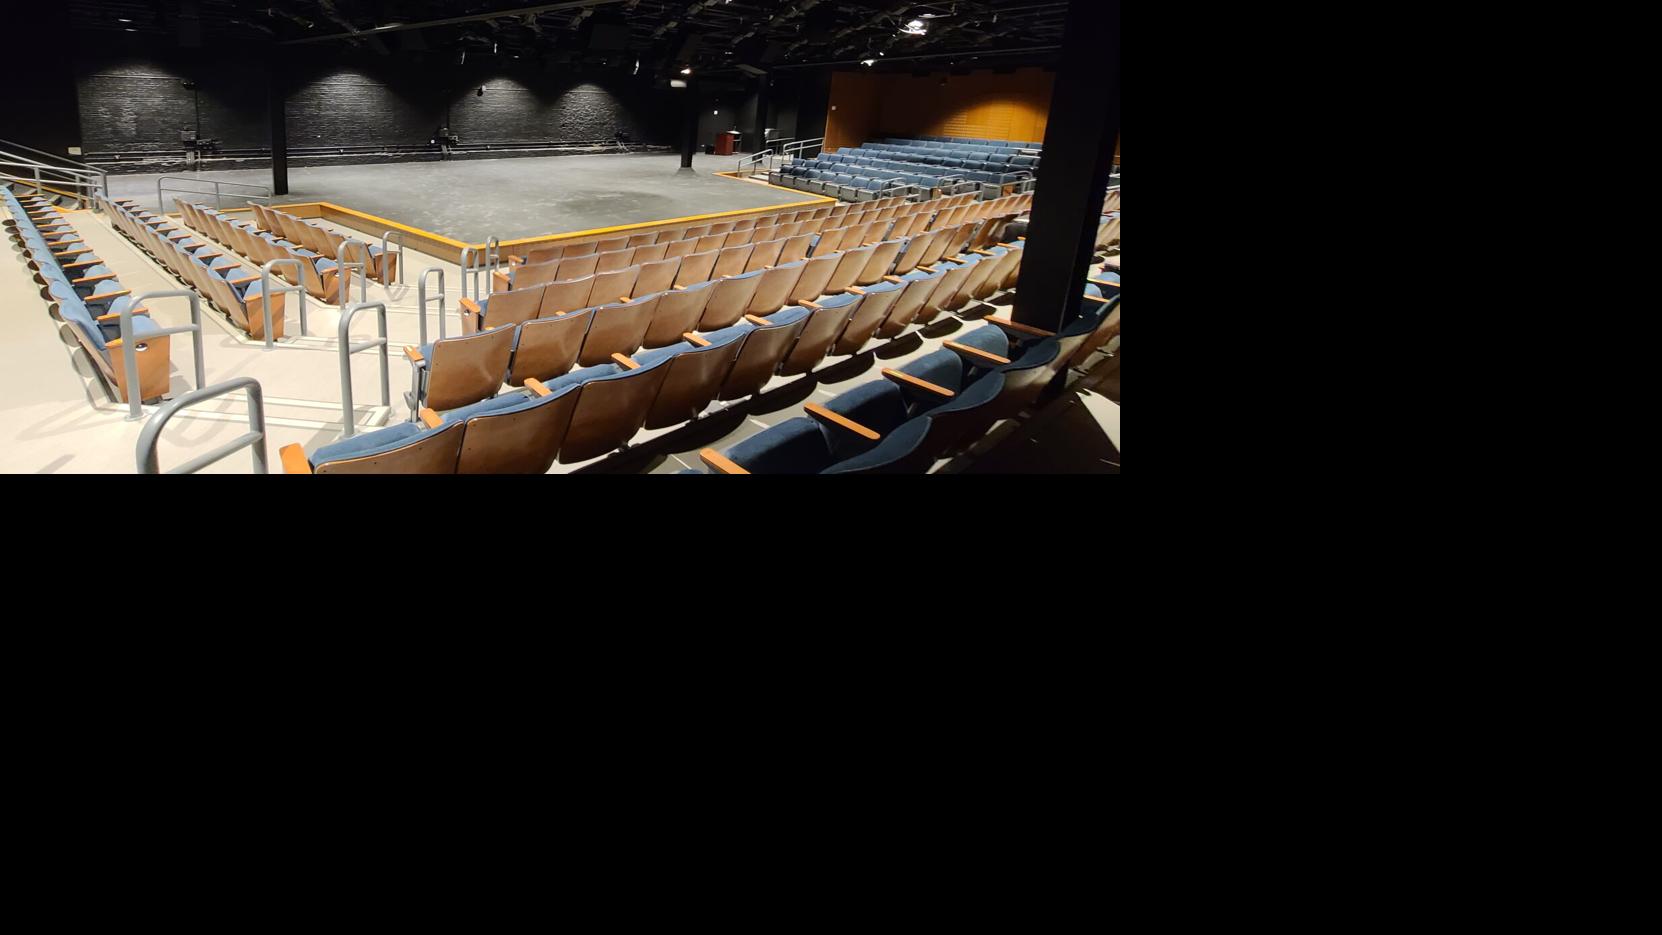 Take a tour of Capital Repertory Company's new theater